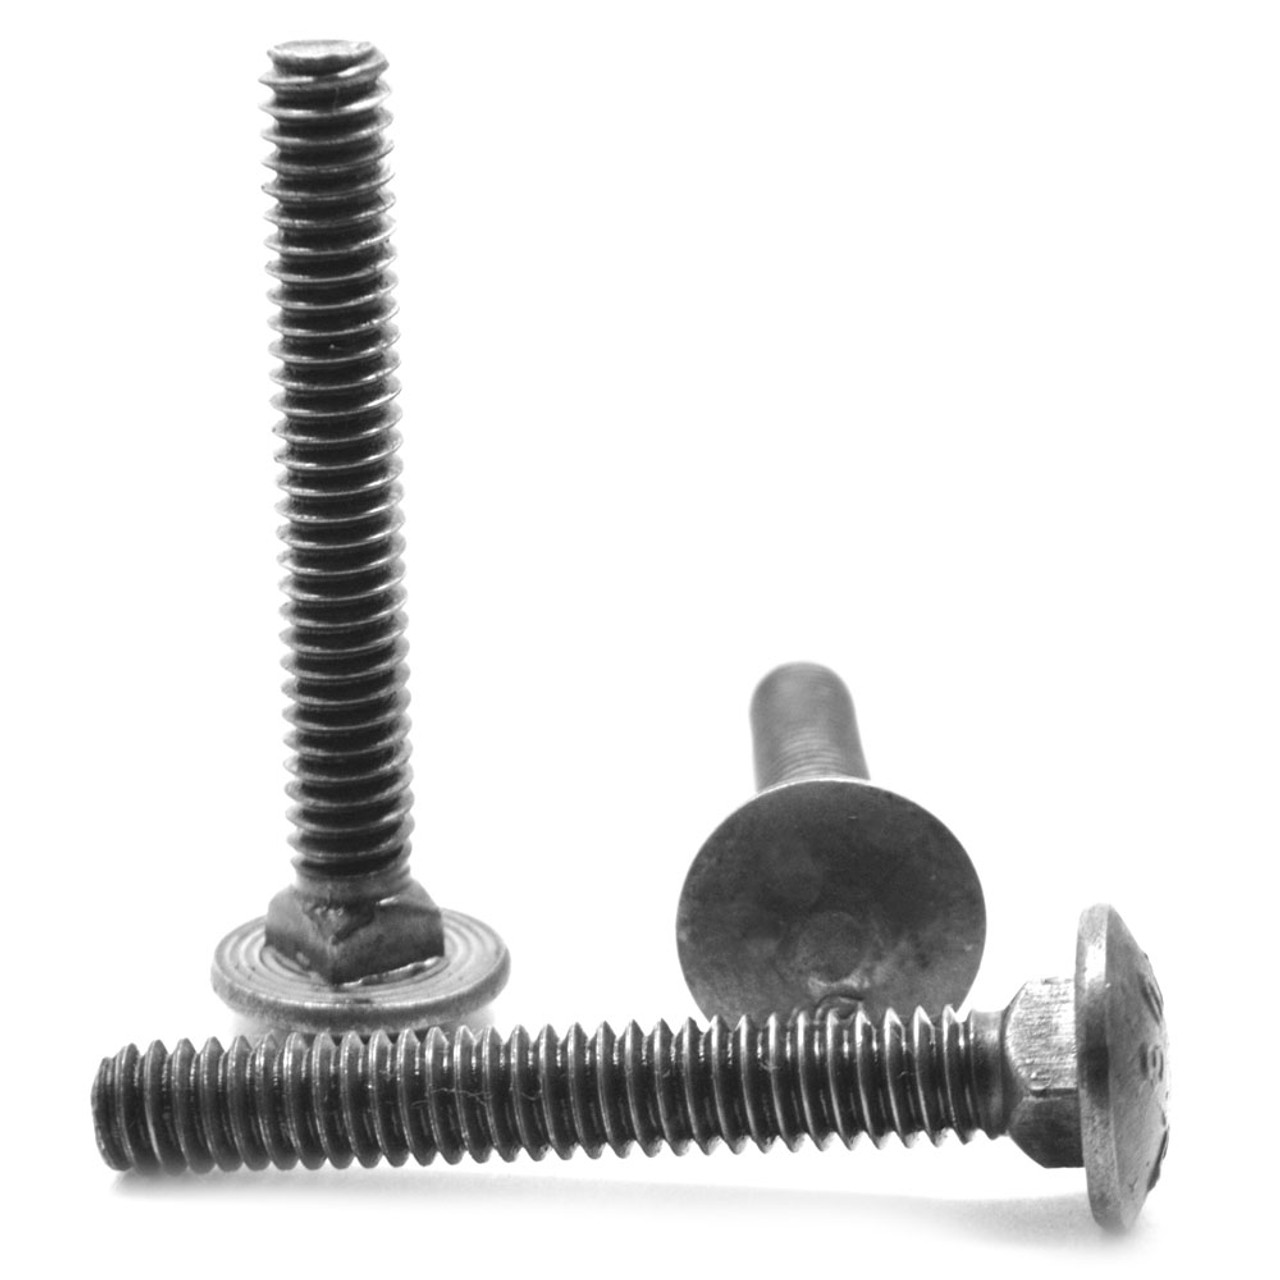 5/16"-18 x 3 3/4" (FT) Coarse Thread A307 Grade A Carriage Bolt Low Carbon Steel Plain Finish